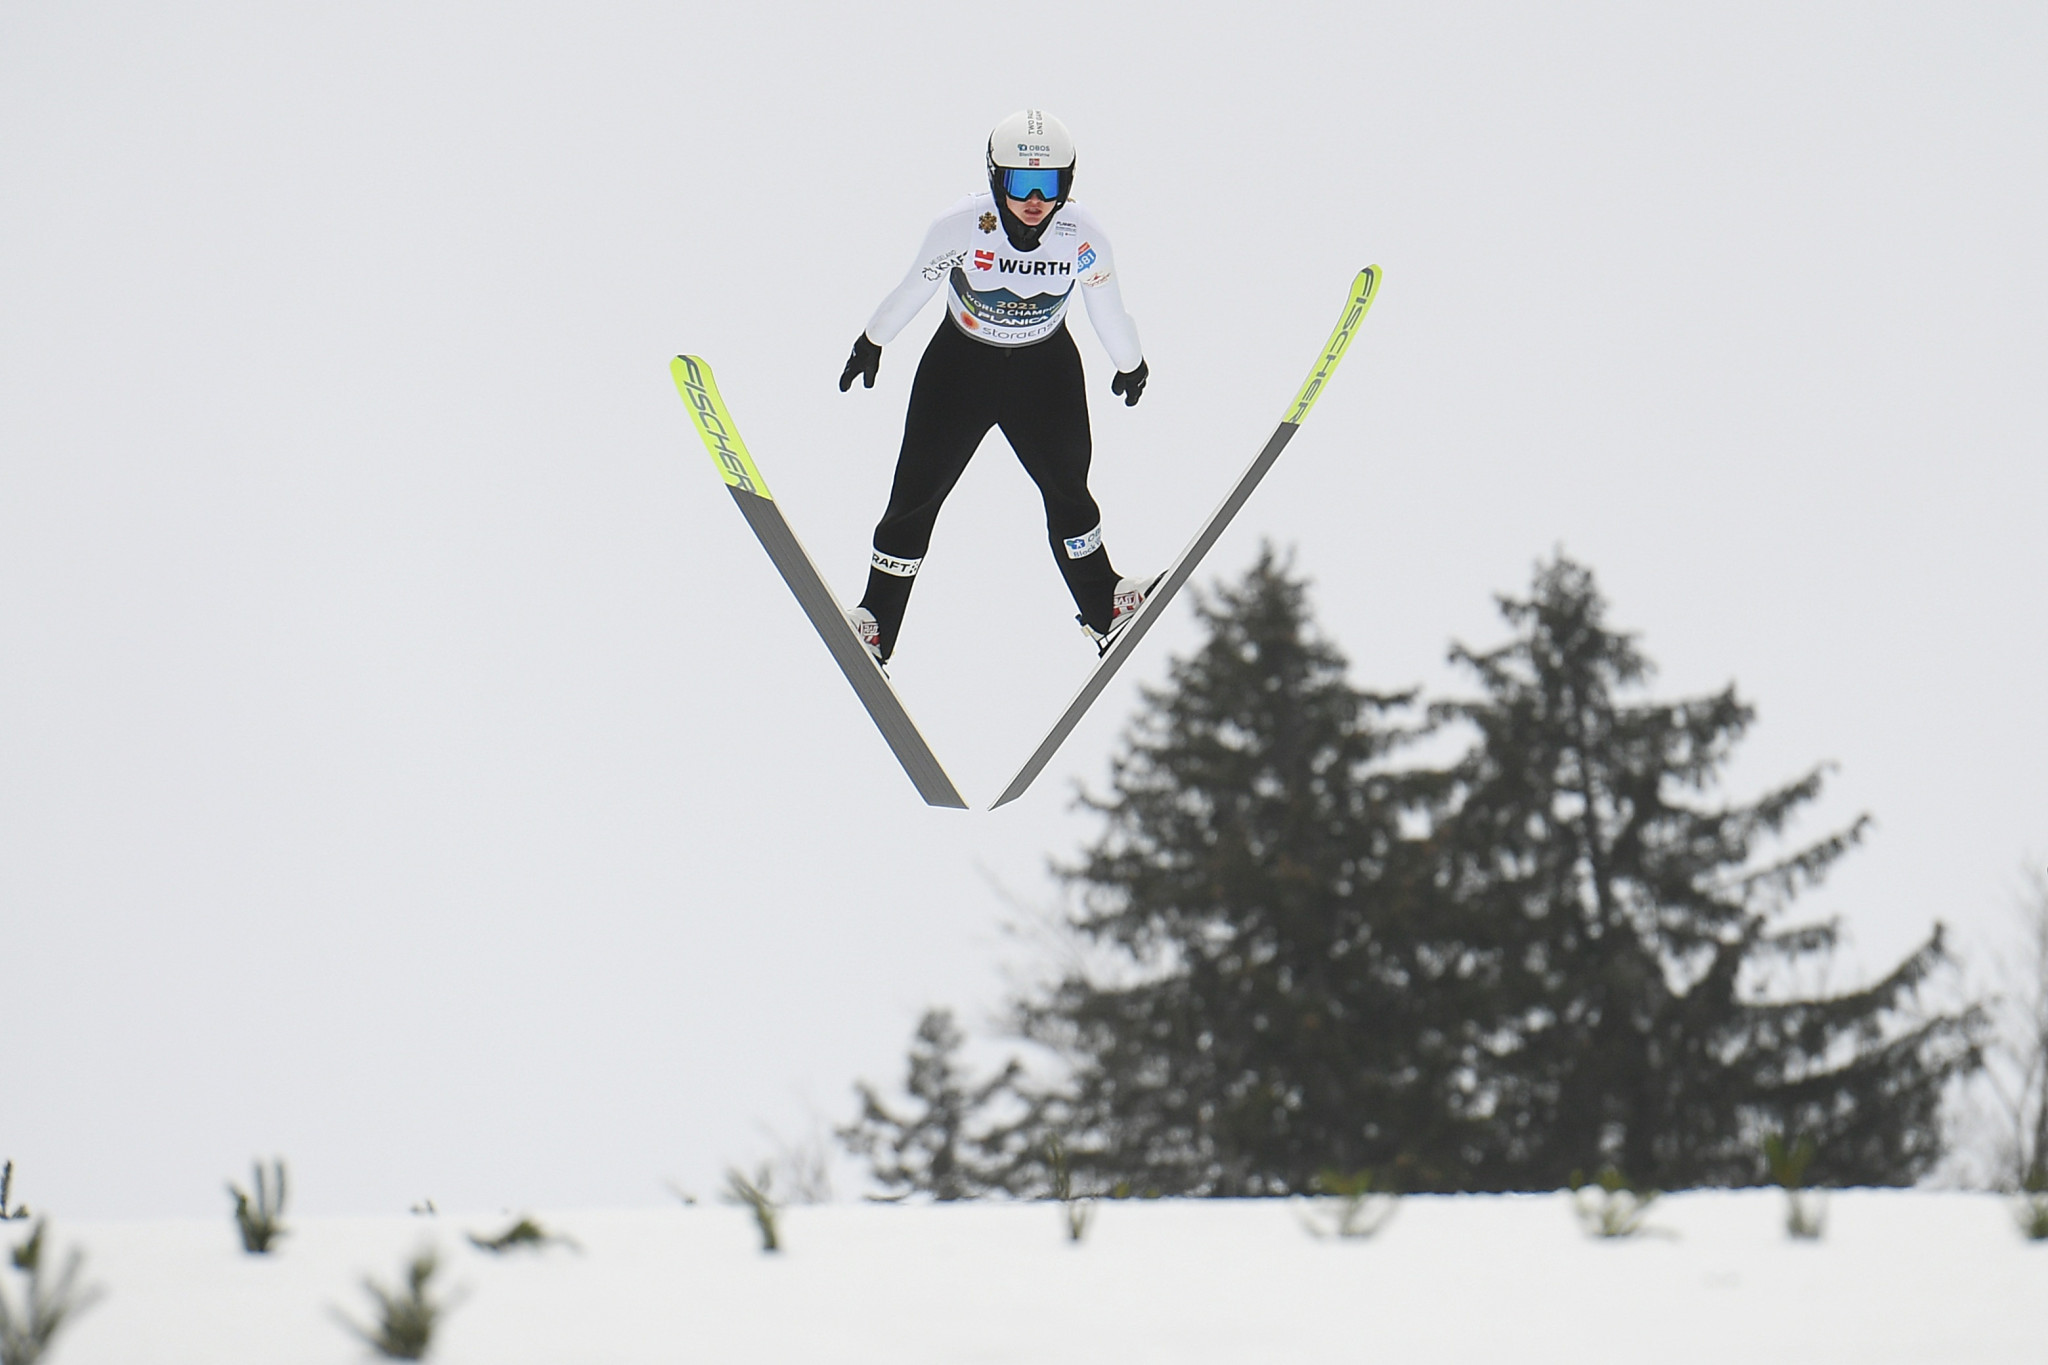 Hansen takes lead in bid for perfect FIS Nordic Combined World Cup season